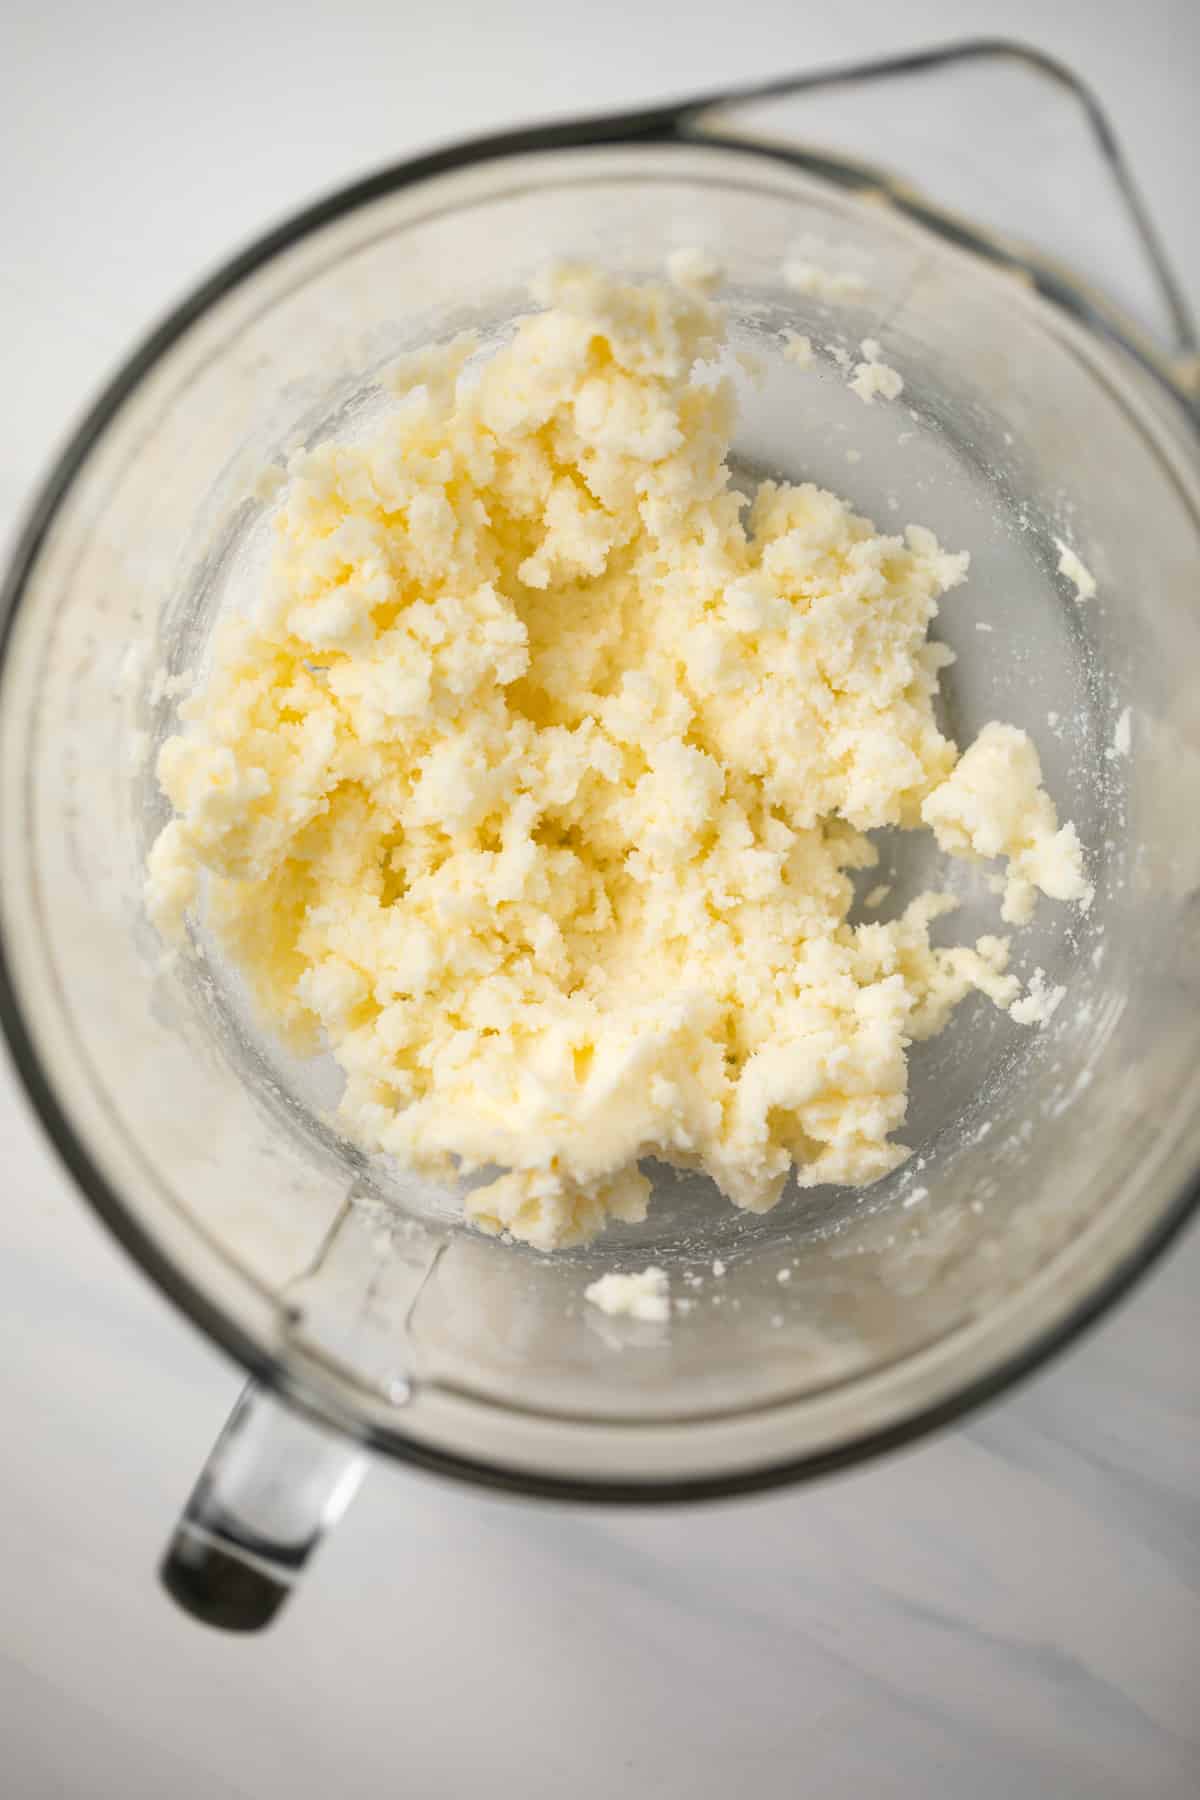 Butter and sugar creamed in glass bowl.